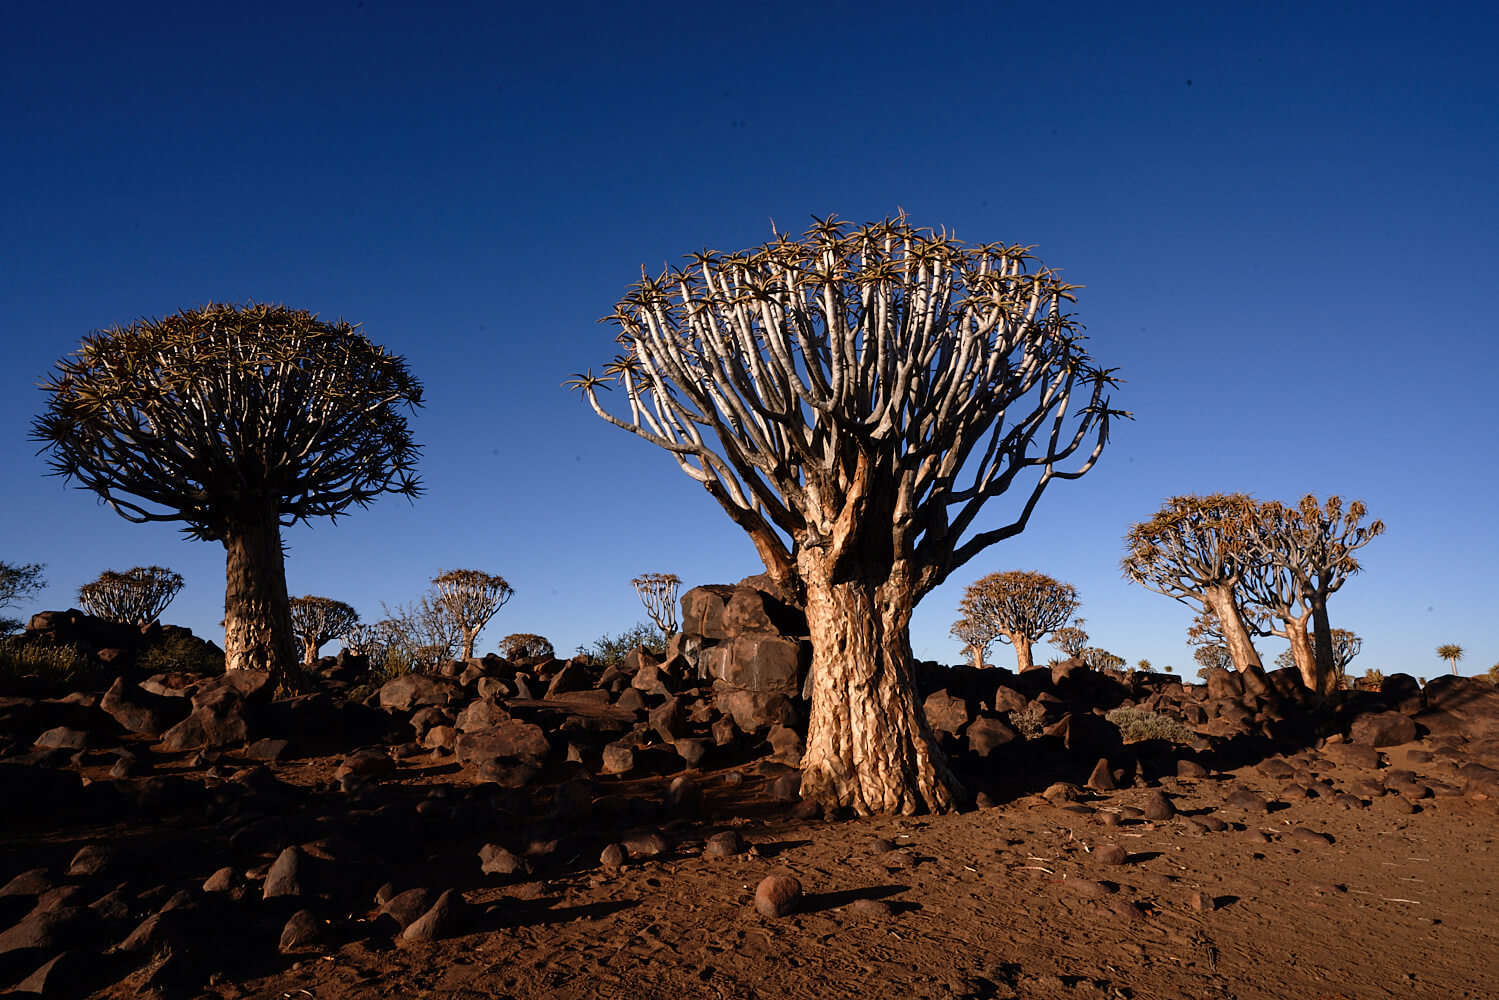 The picture shows the Quivertree Forest near Keetmanshoop in beautiful evening light